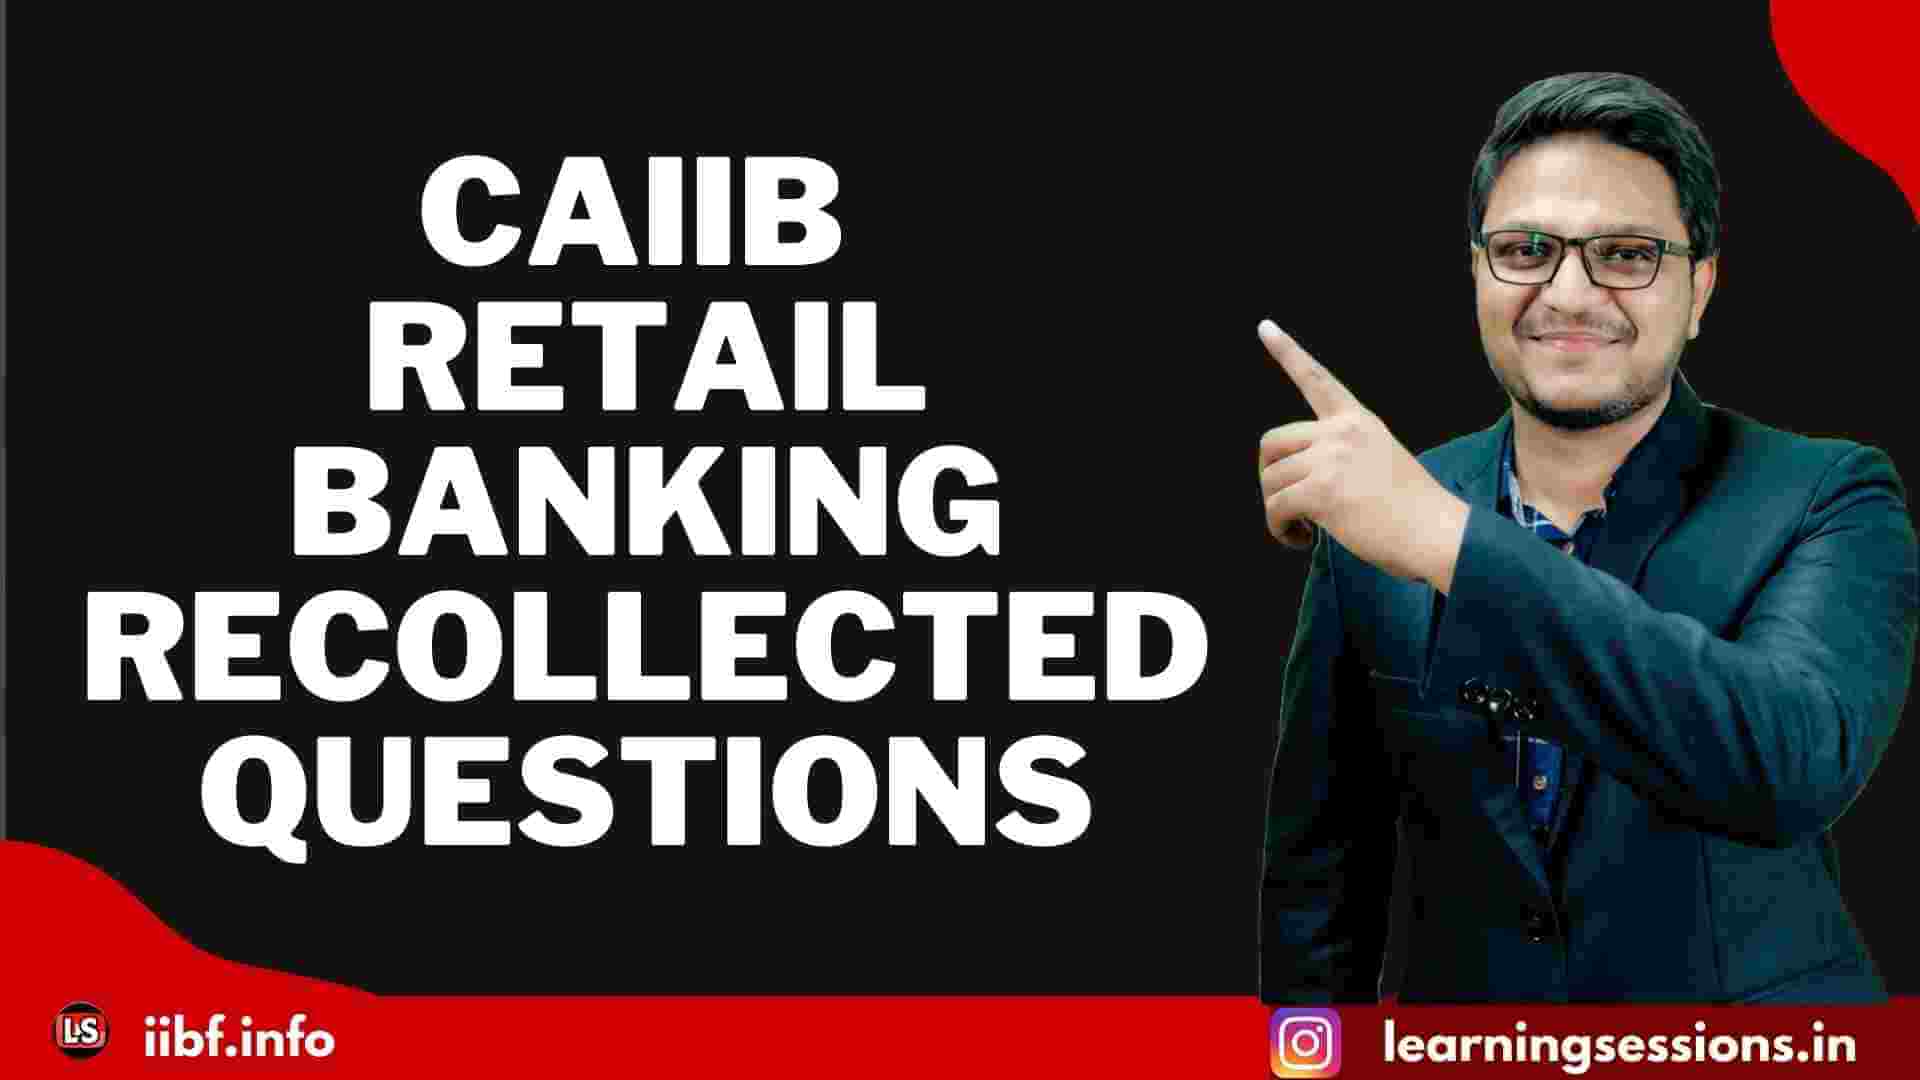 IIBF CAIIB RETAIL BANKING RECOLLECTED QUESTIONS 2021-2022